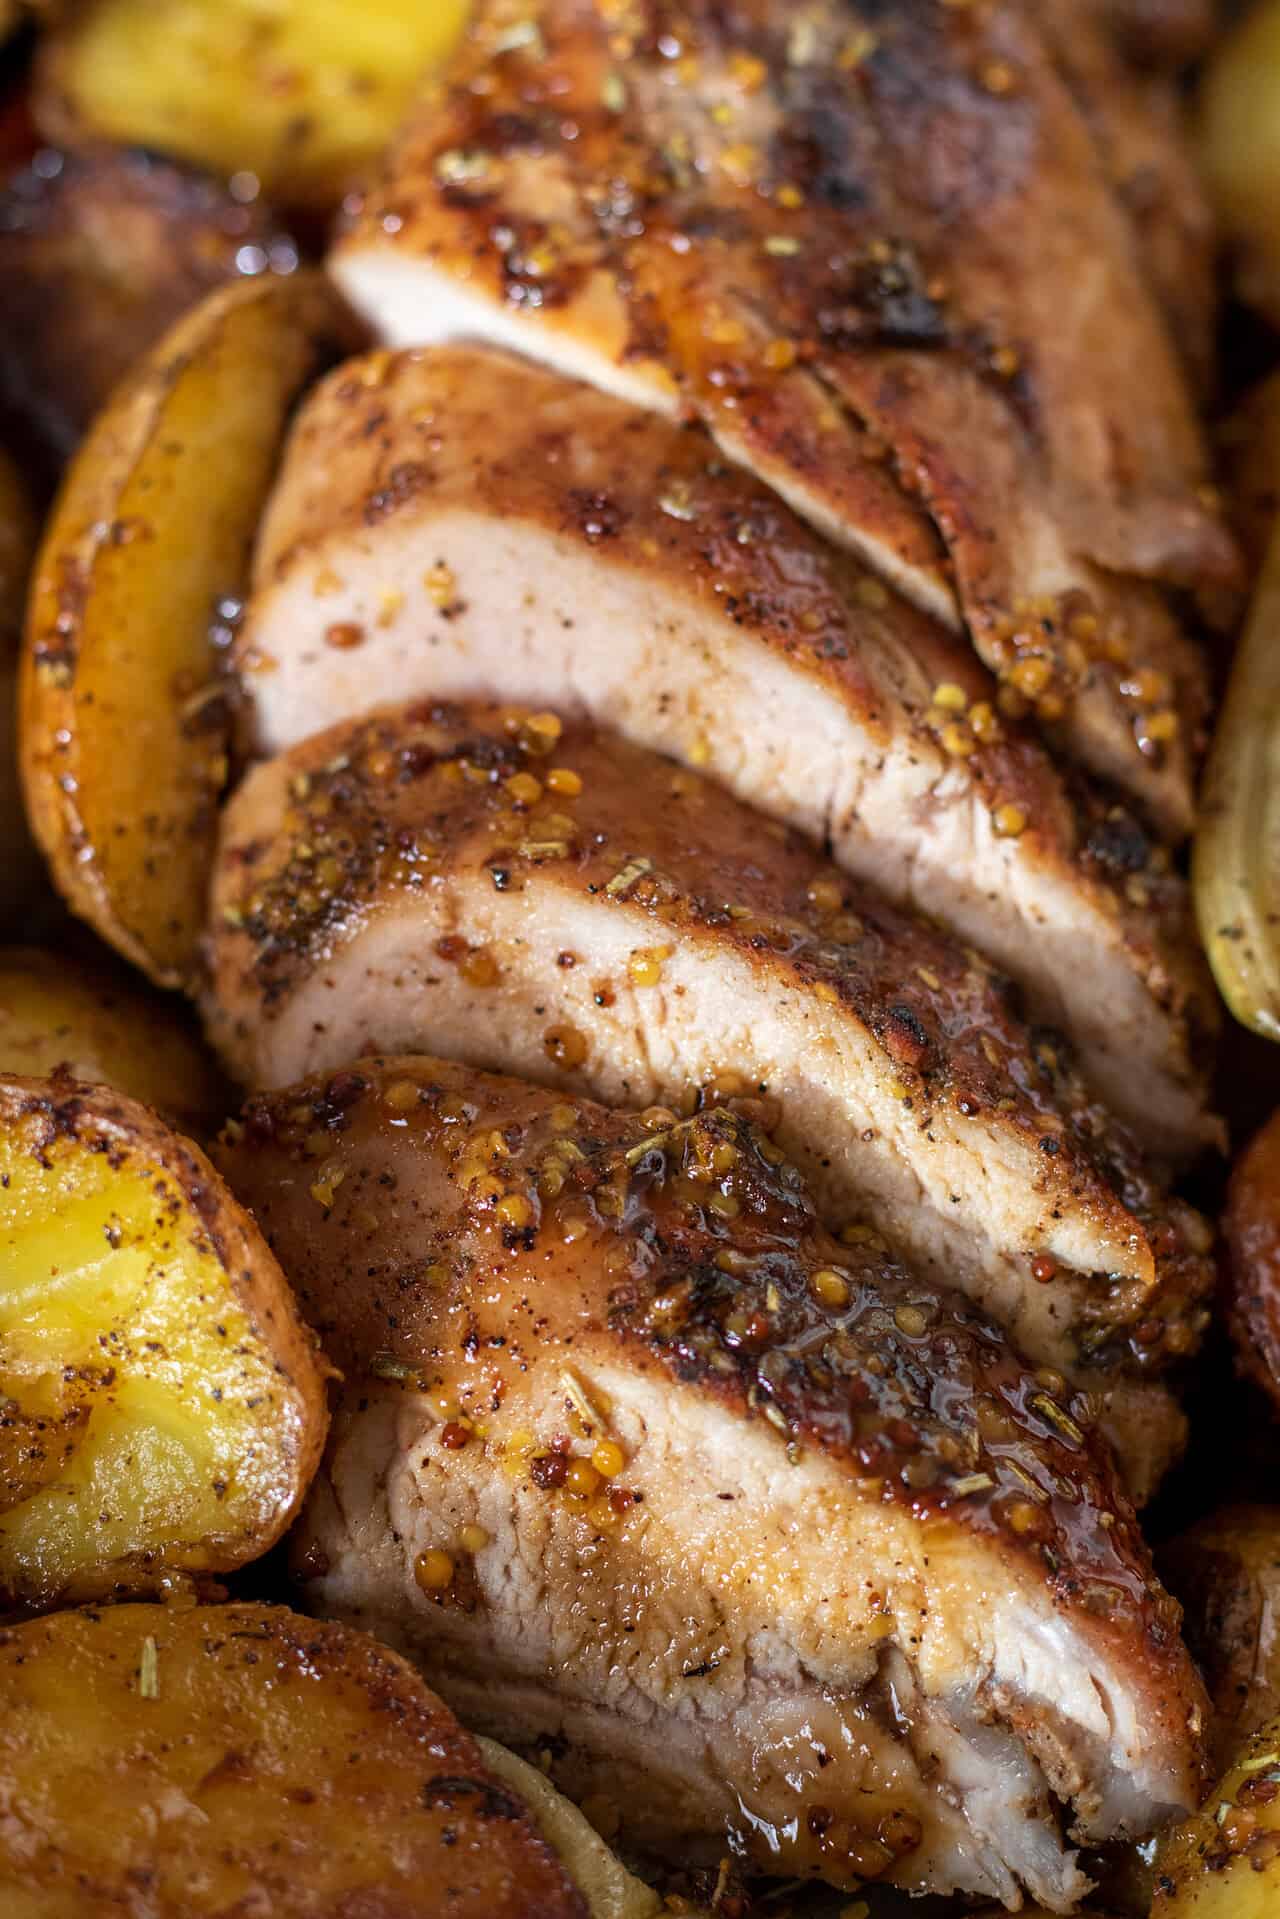 A pork tenderloin that's been sliced for serving. There's a honey mustard glaze on top of it with roasted potatoes and carrots around the pan.